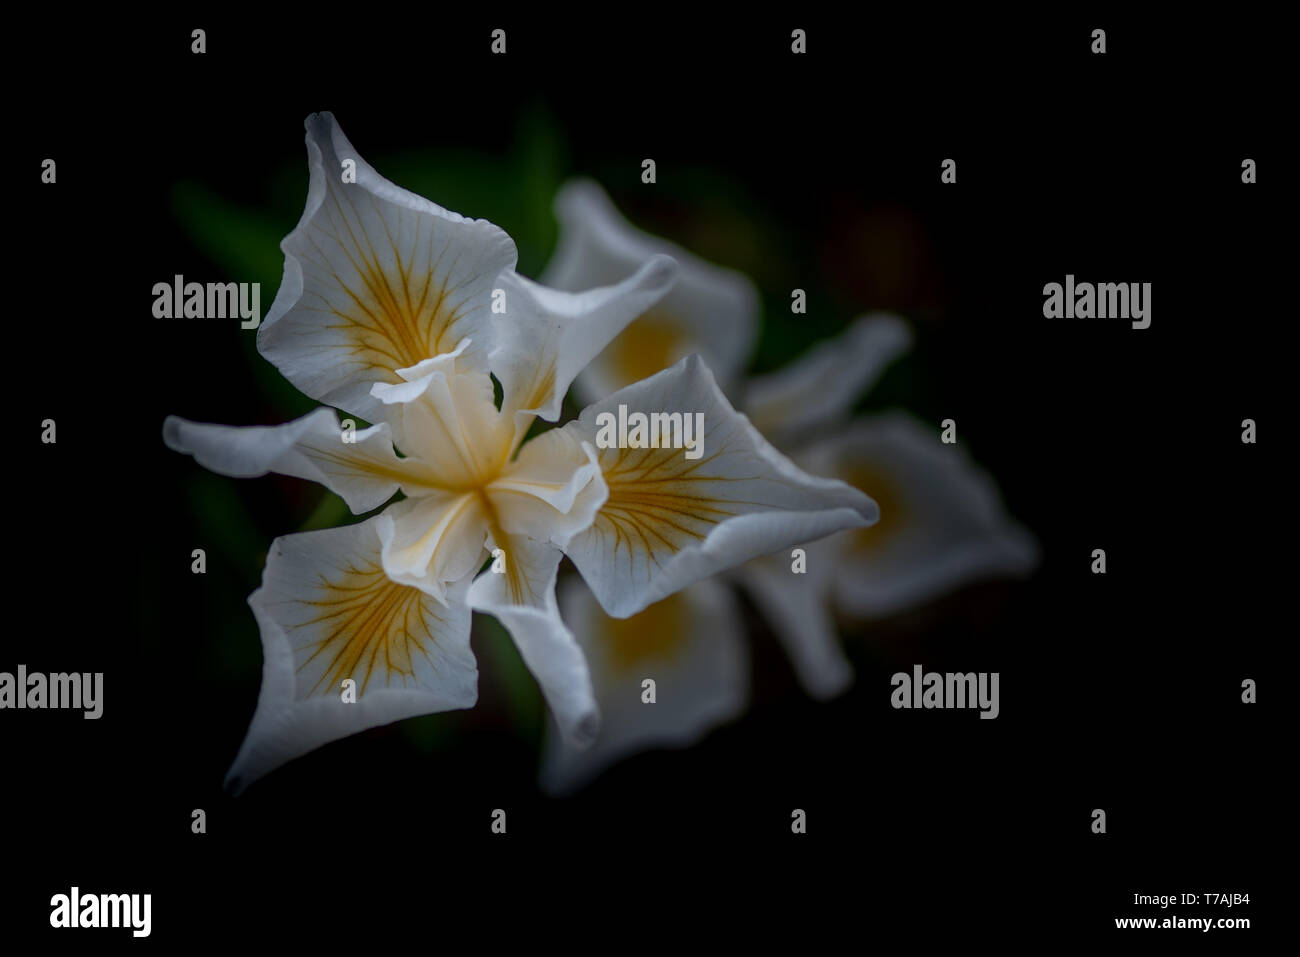 White African Iris, Dietes iridioides, on dark background, top view. This an ornamental plant in the Iridaceae family the flowers last only one day. Stock Photo